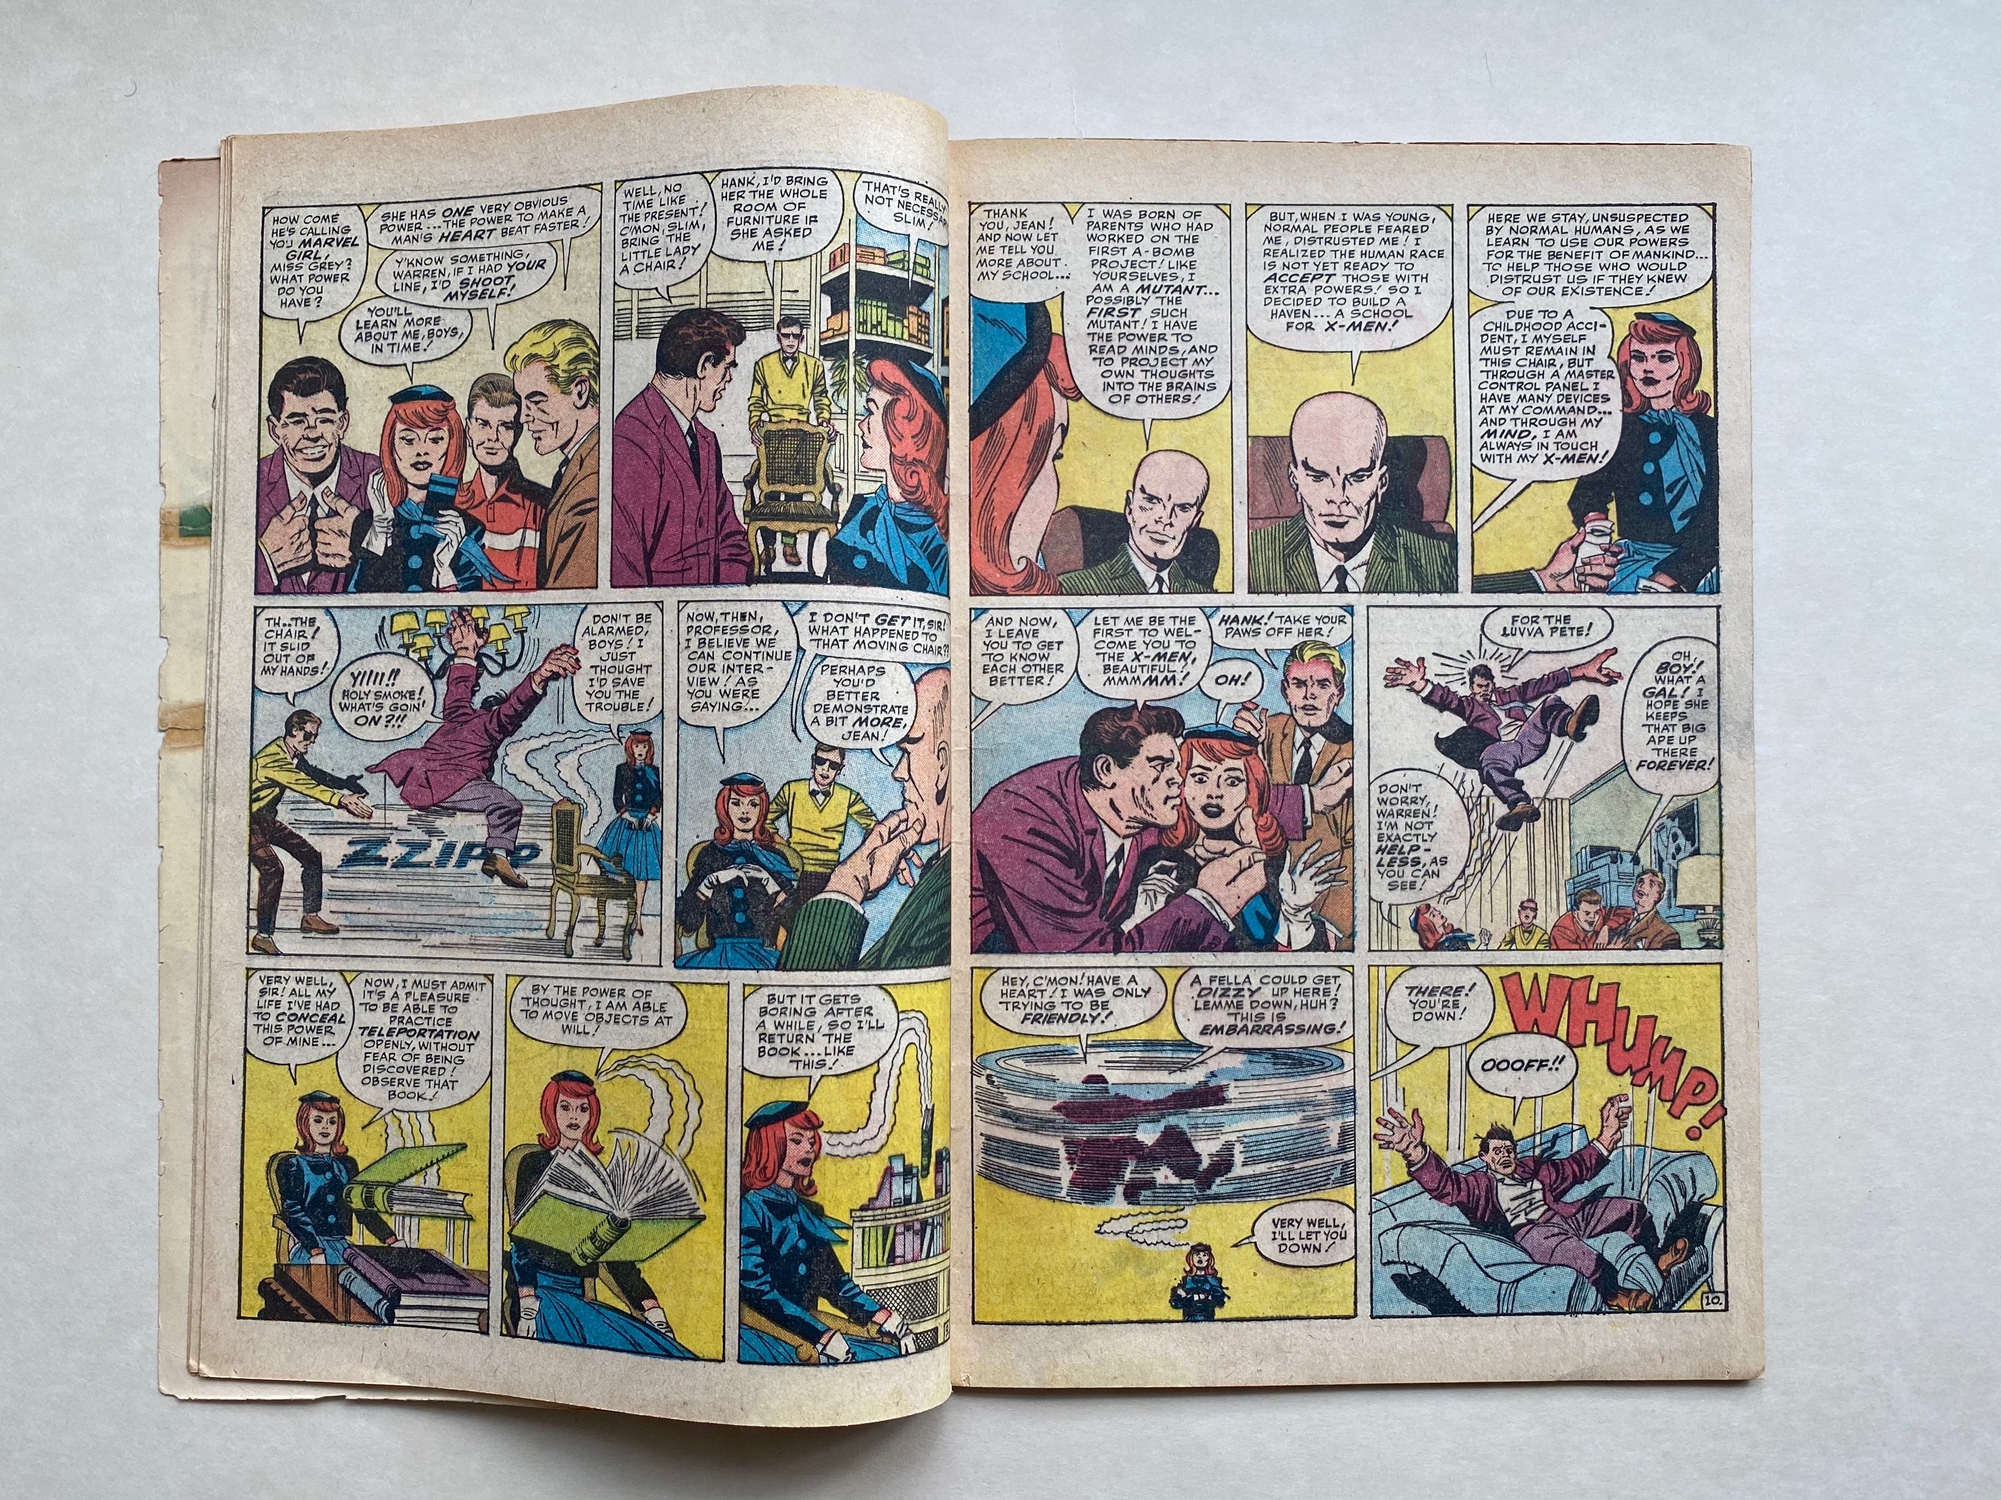 UNCANNY X-MEN #1 - (1963 - MARVEL - Pence Copy) - One of the most important Marvel Silver Age keys - - Image 6 of 9